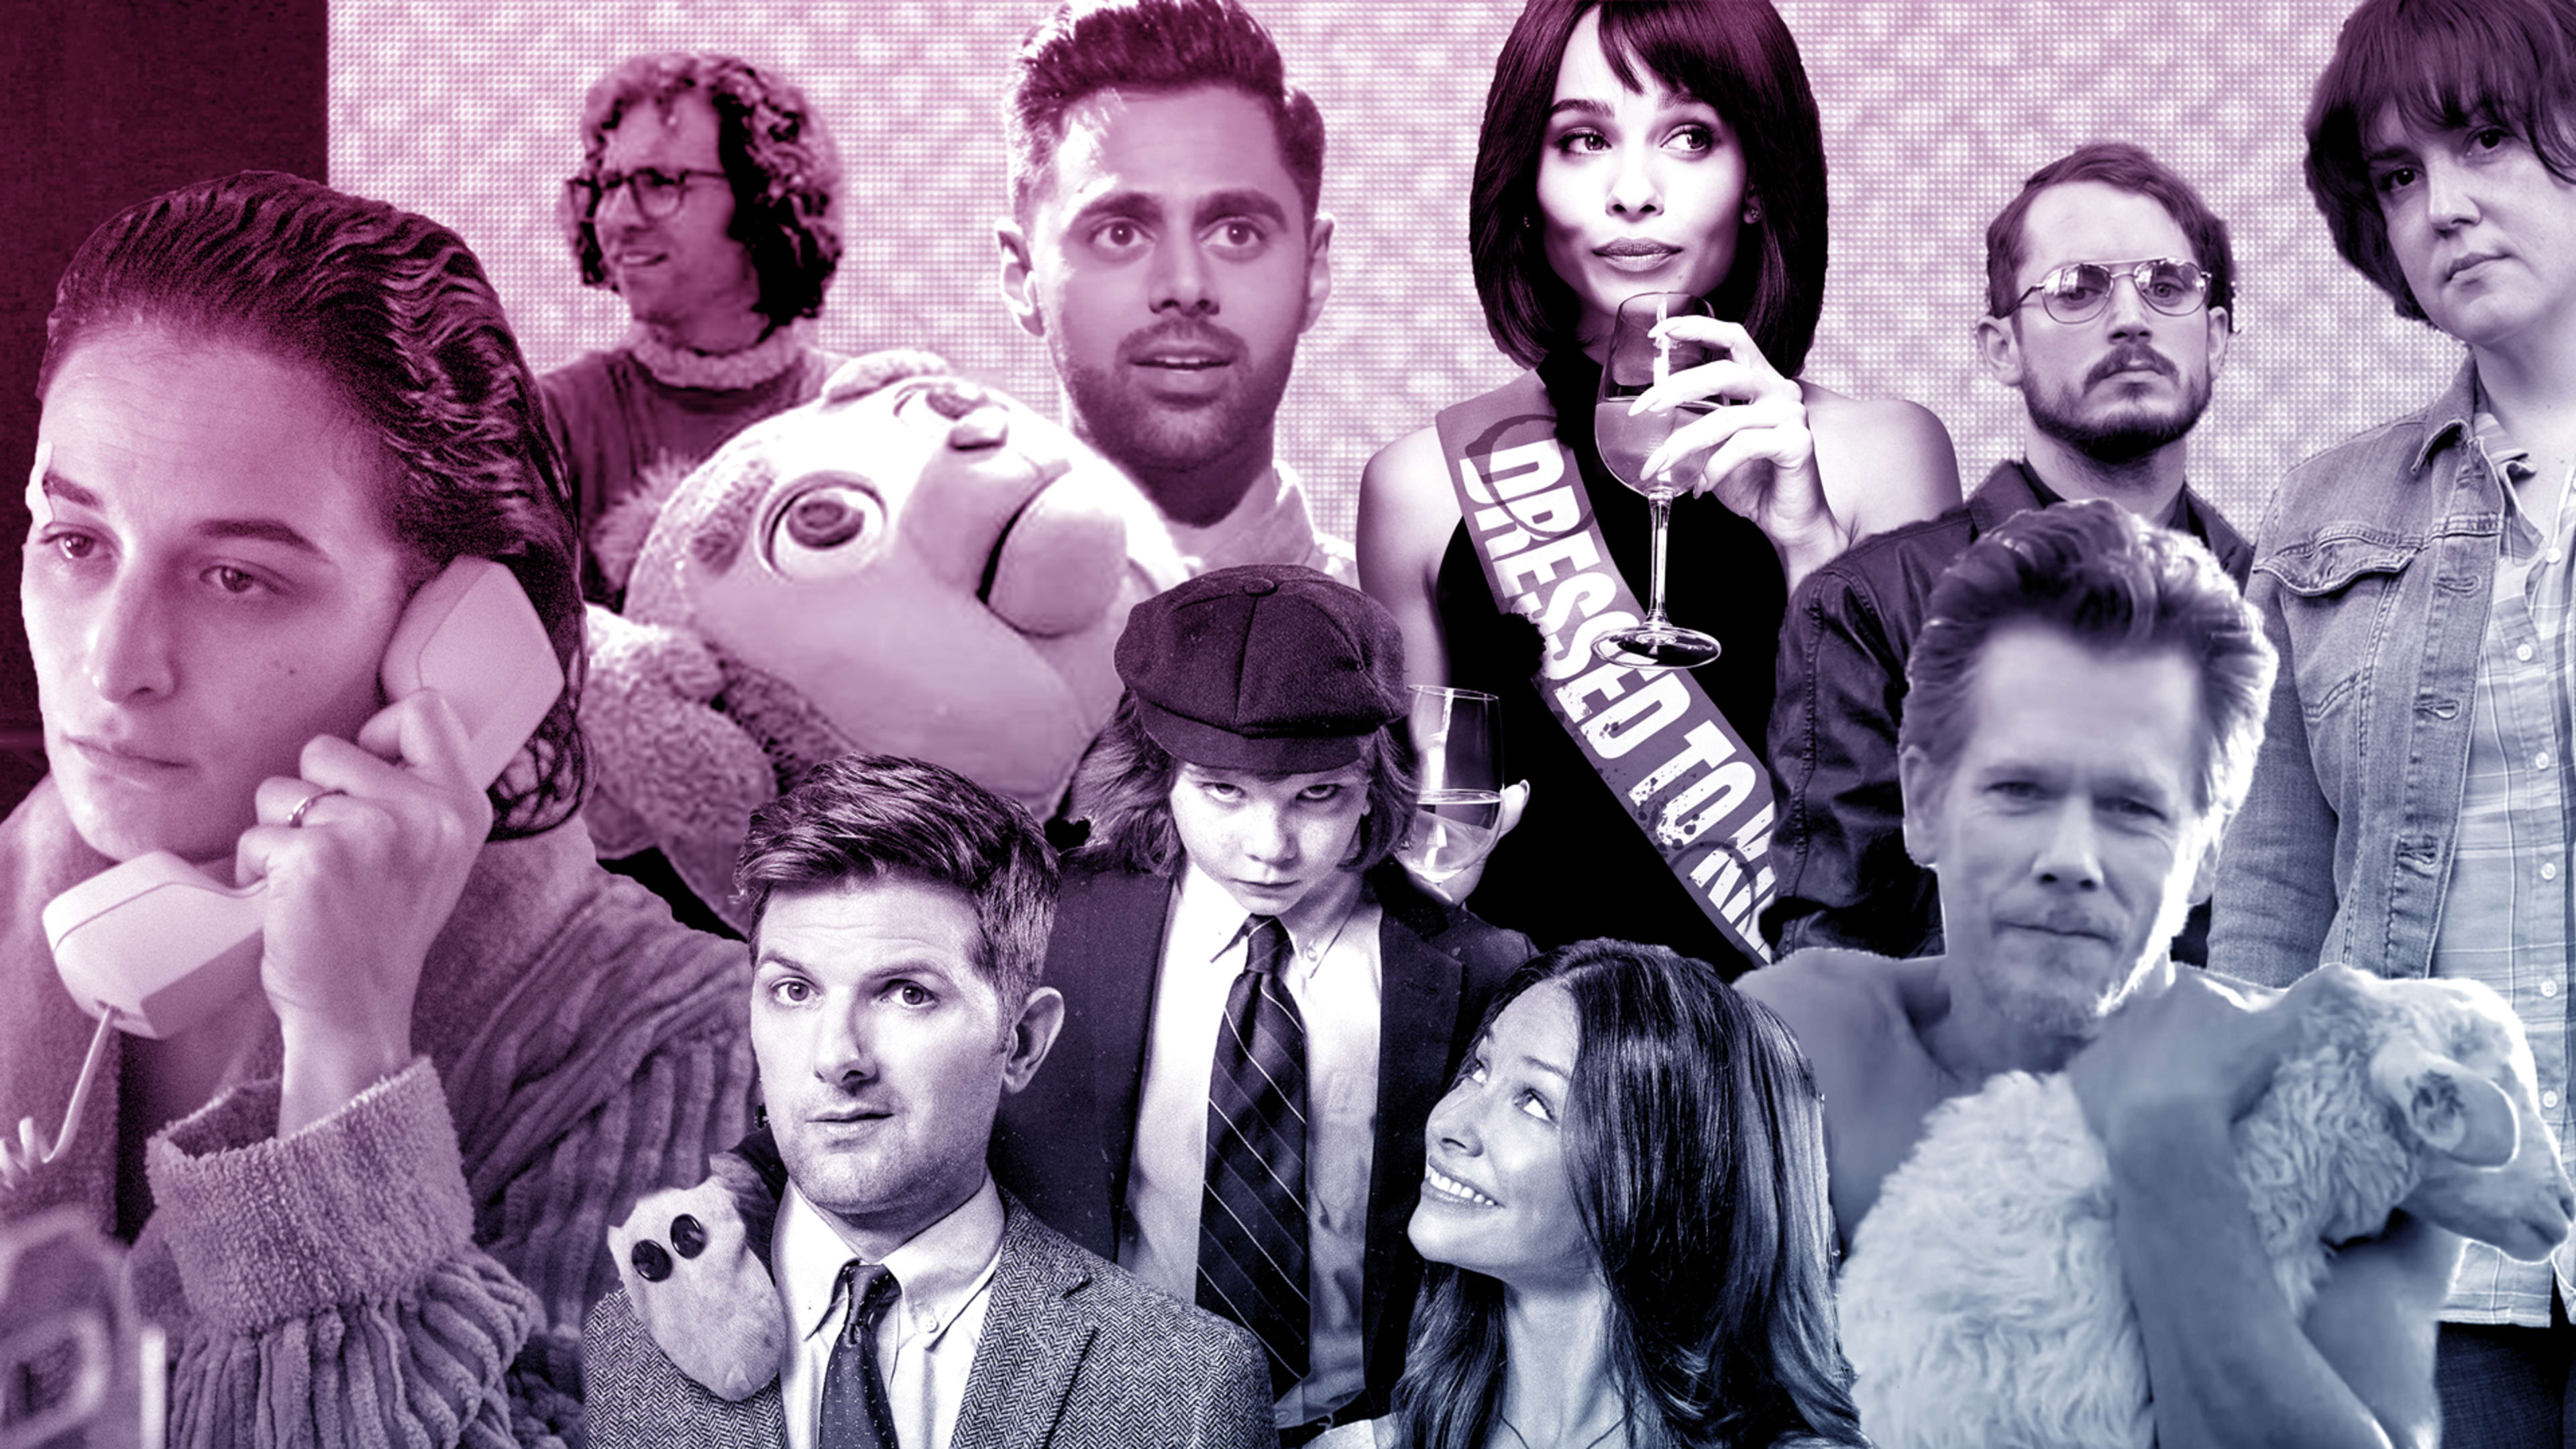 39 Movies, TV Shows, Albums, And Podcasts You Might Have Missed In 2017